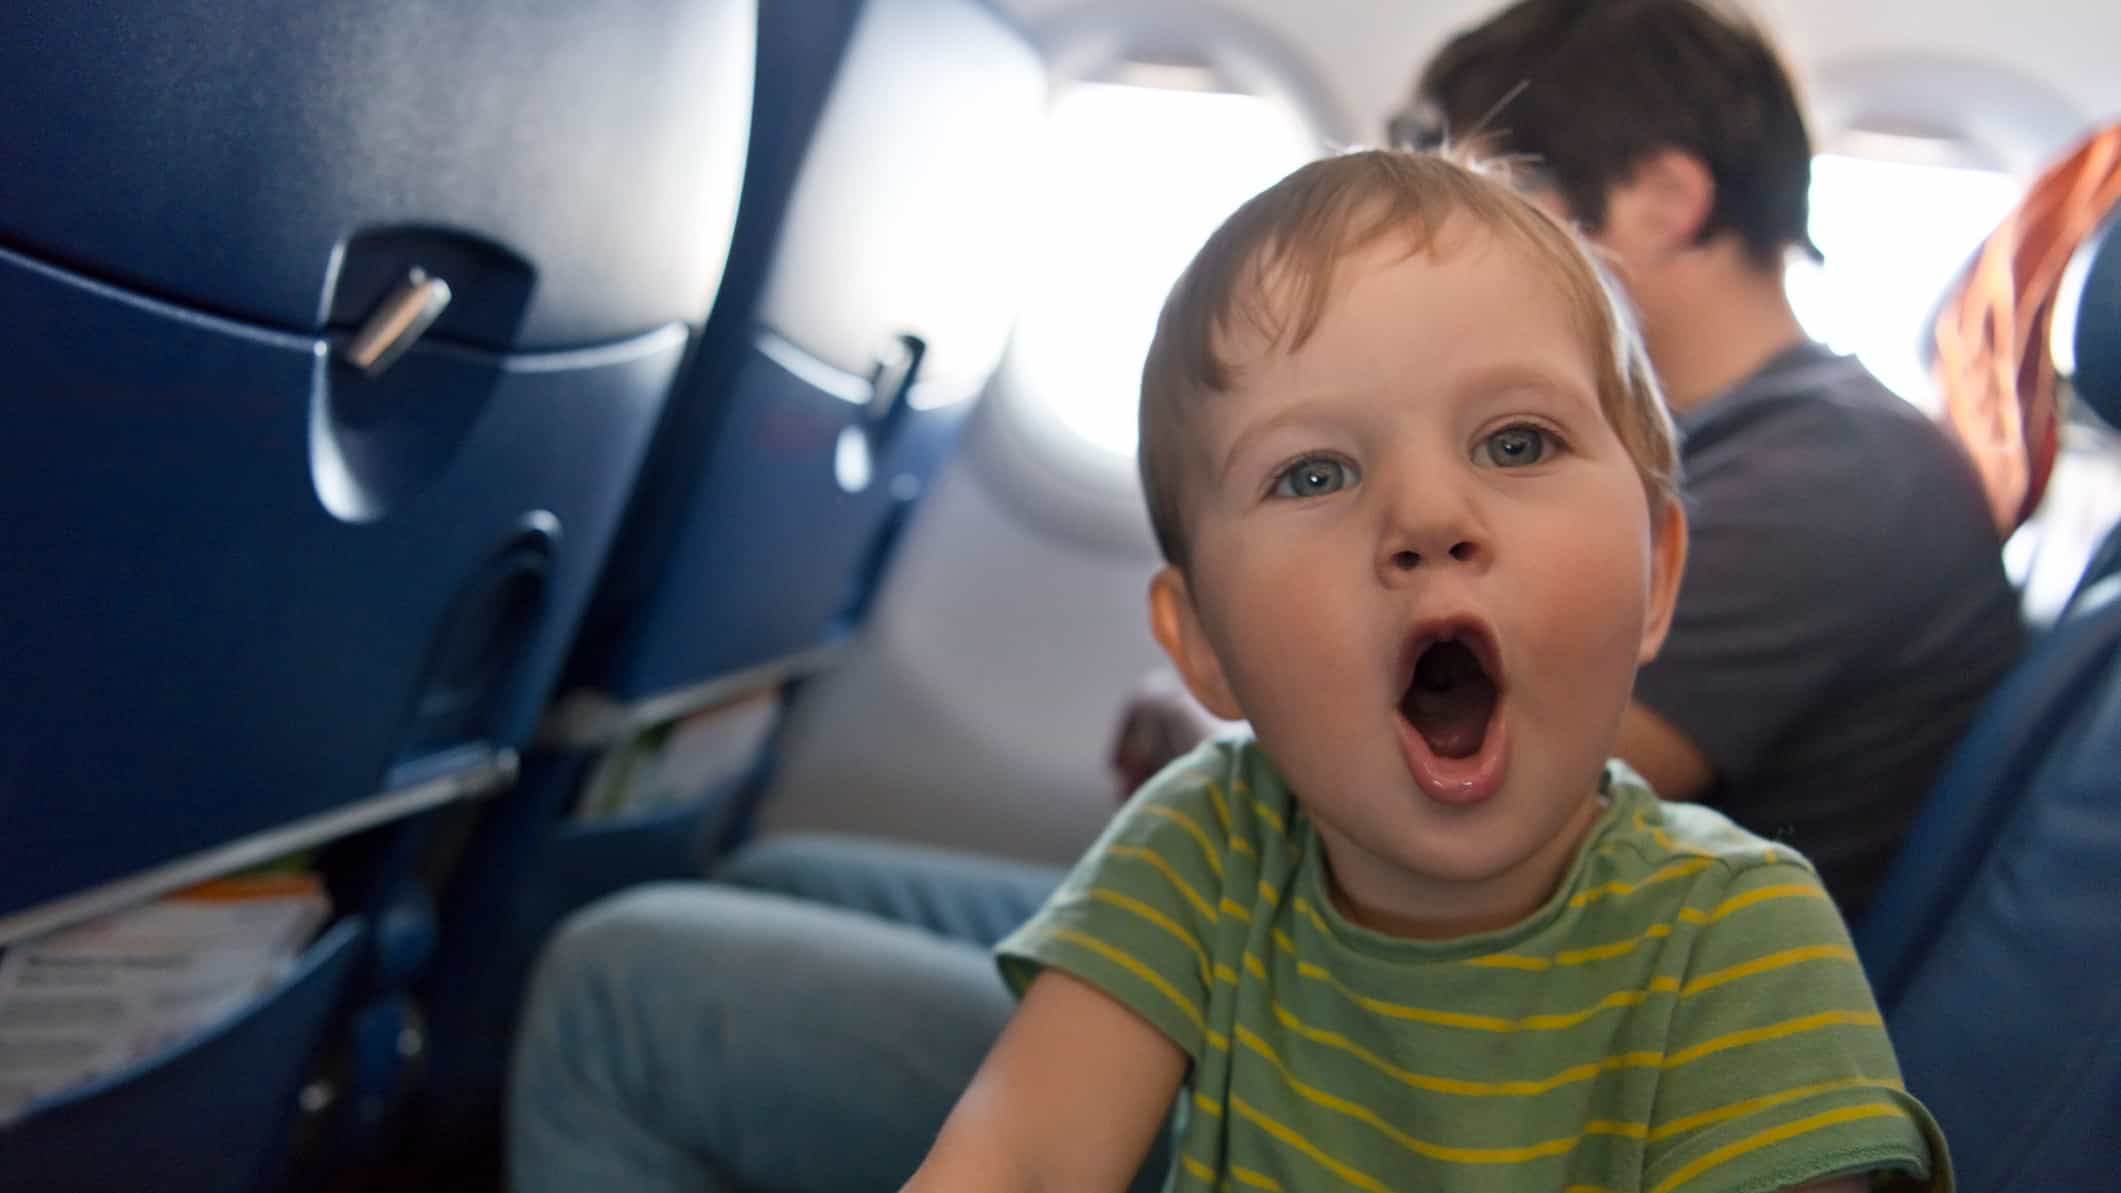 A little boy opens his mouth wide, excited about taking a plane trip.